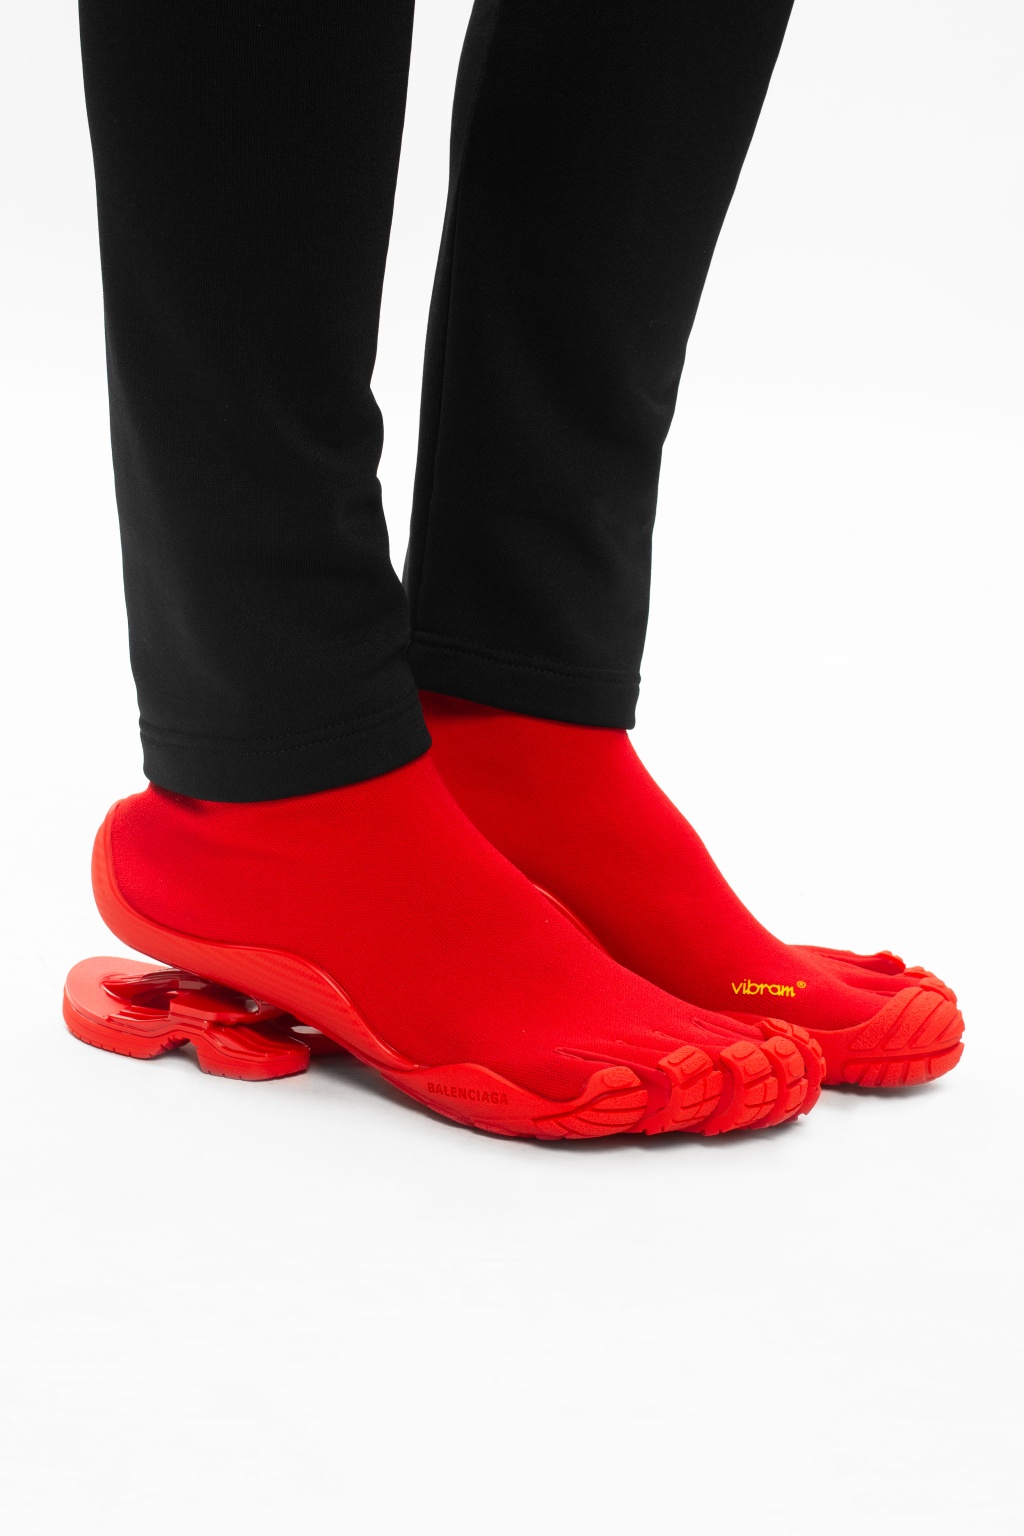 red balenciaga sock shoes outfit｜TikTok Search